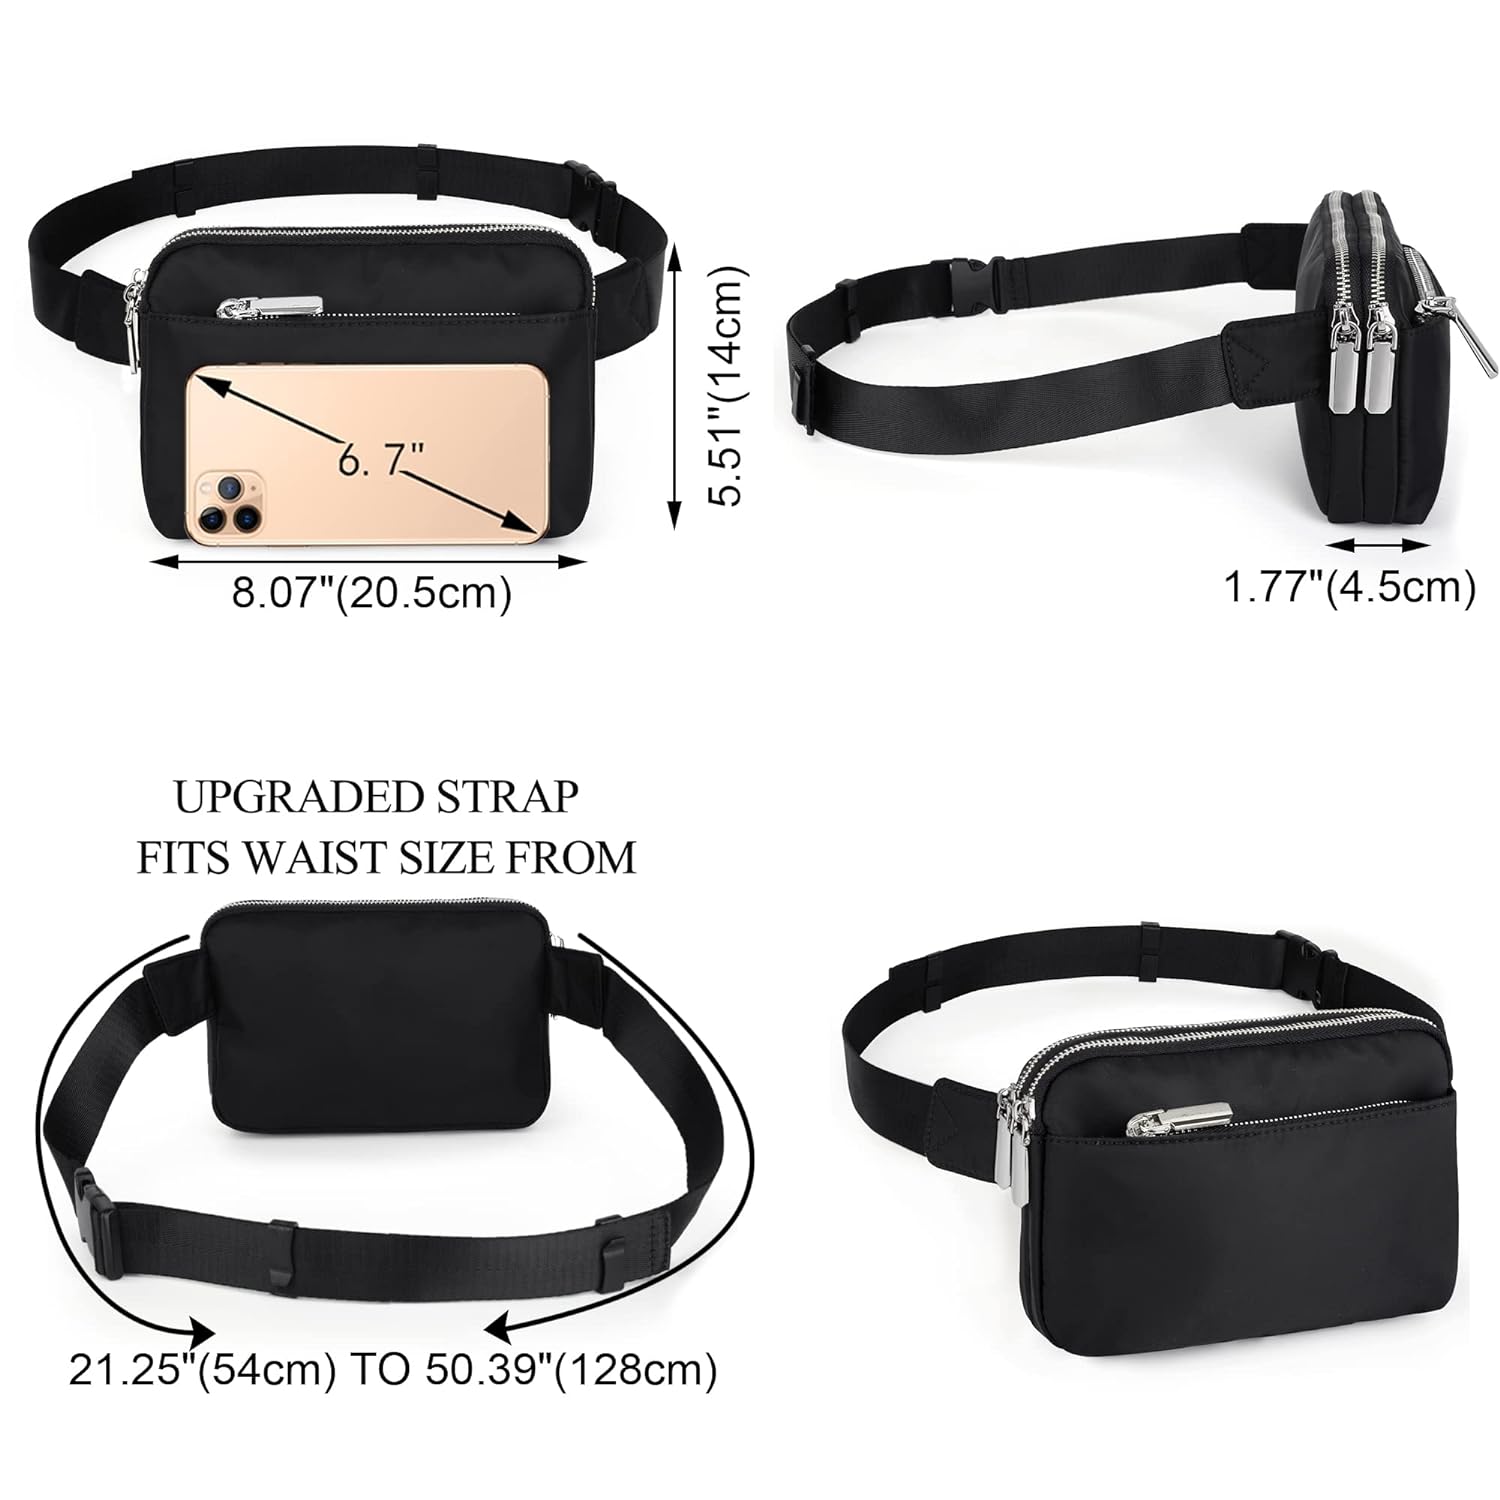 UTO Fanny Pack for Women Men Belt Bag Fashion Designer Chest Waist Packs Hip Bumbags for Outdoors Shopping Workout Traveling Hiking, 01222 Black, Small